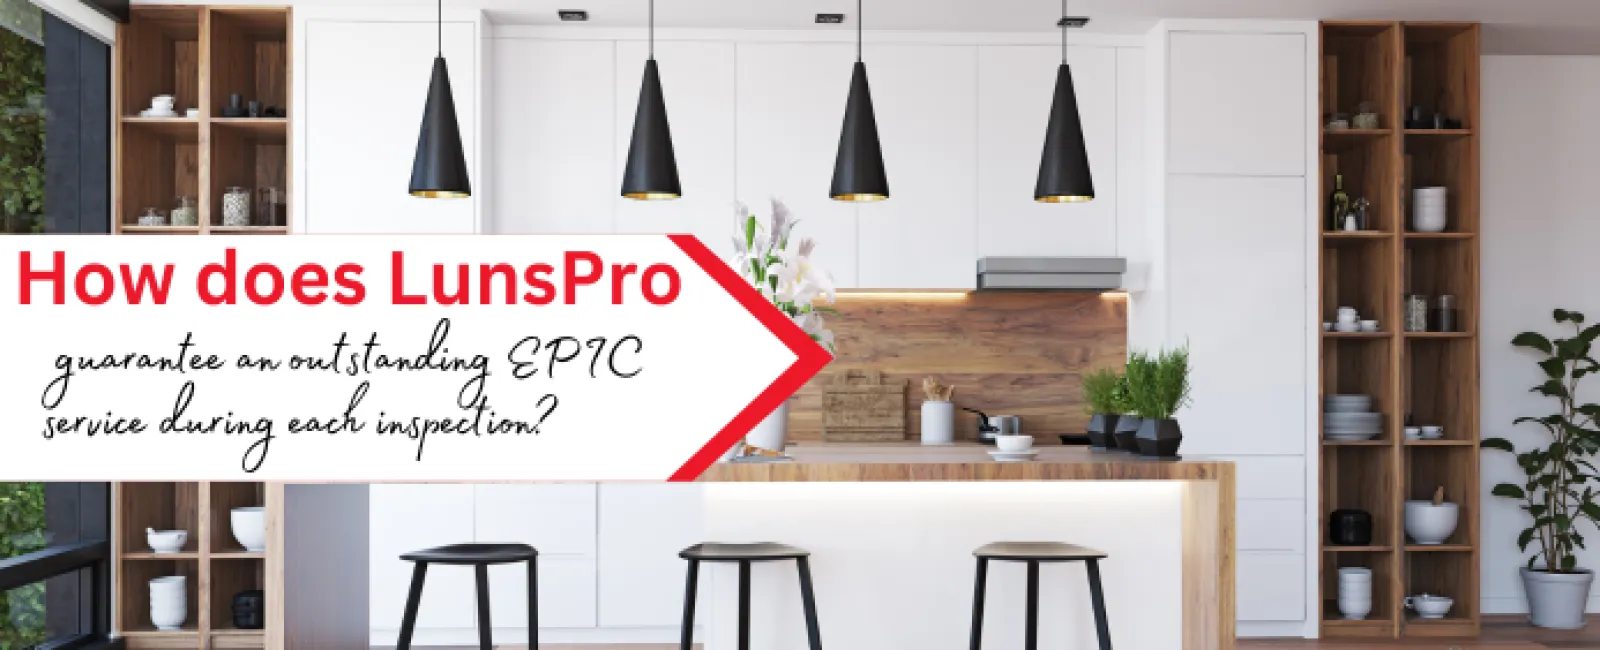 How does LunsPro guarantee an outstanding EPIC service during each inspection?